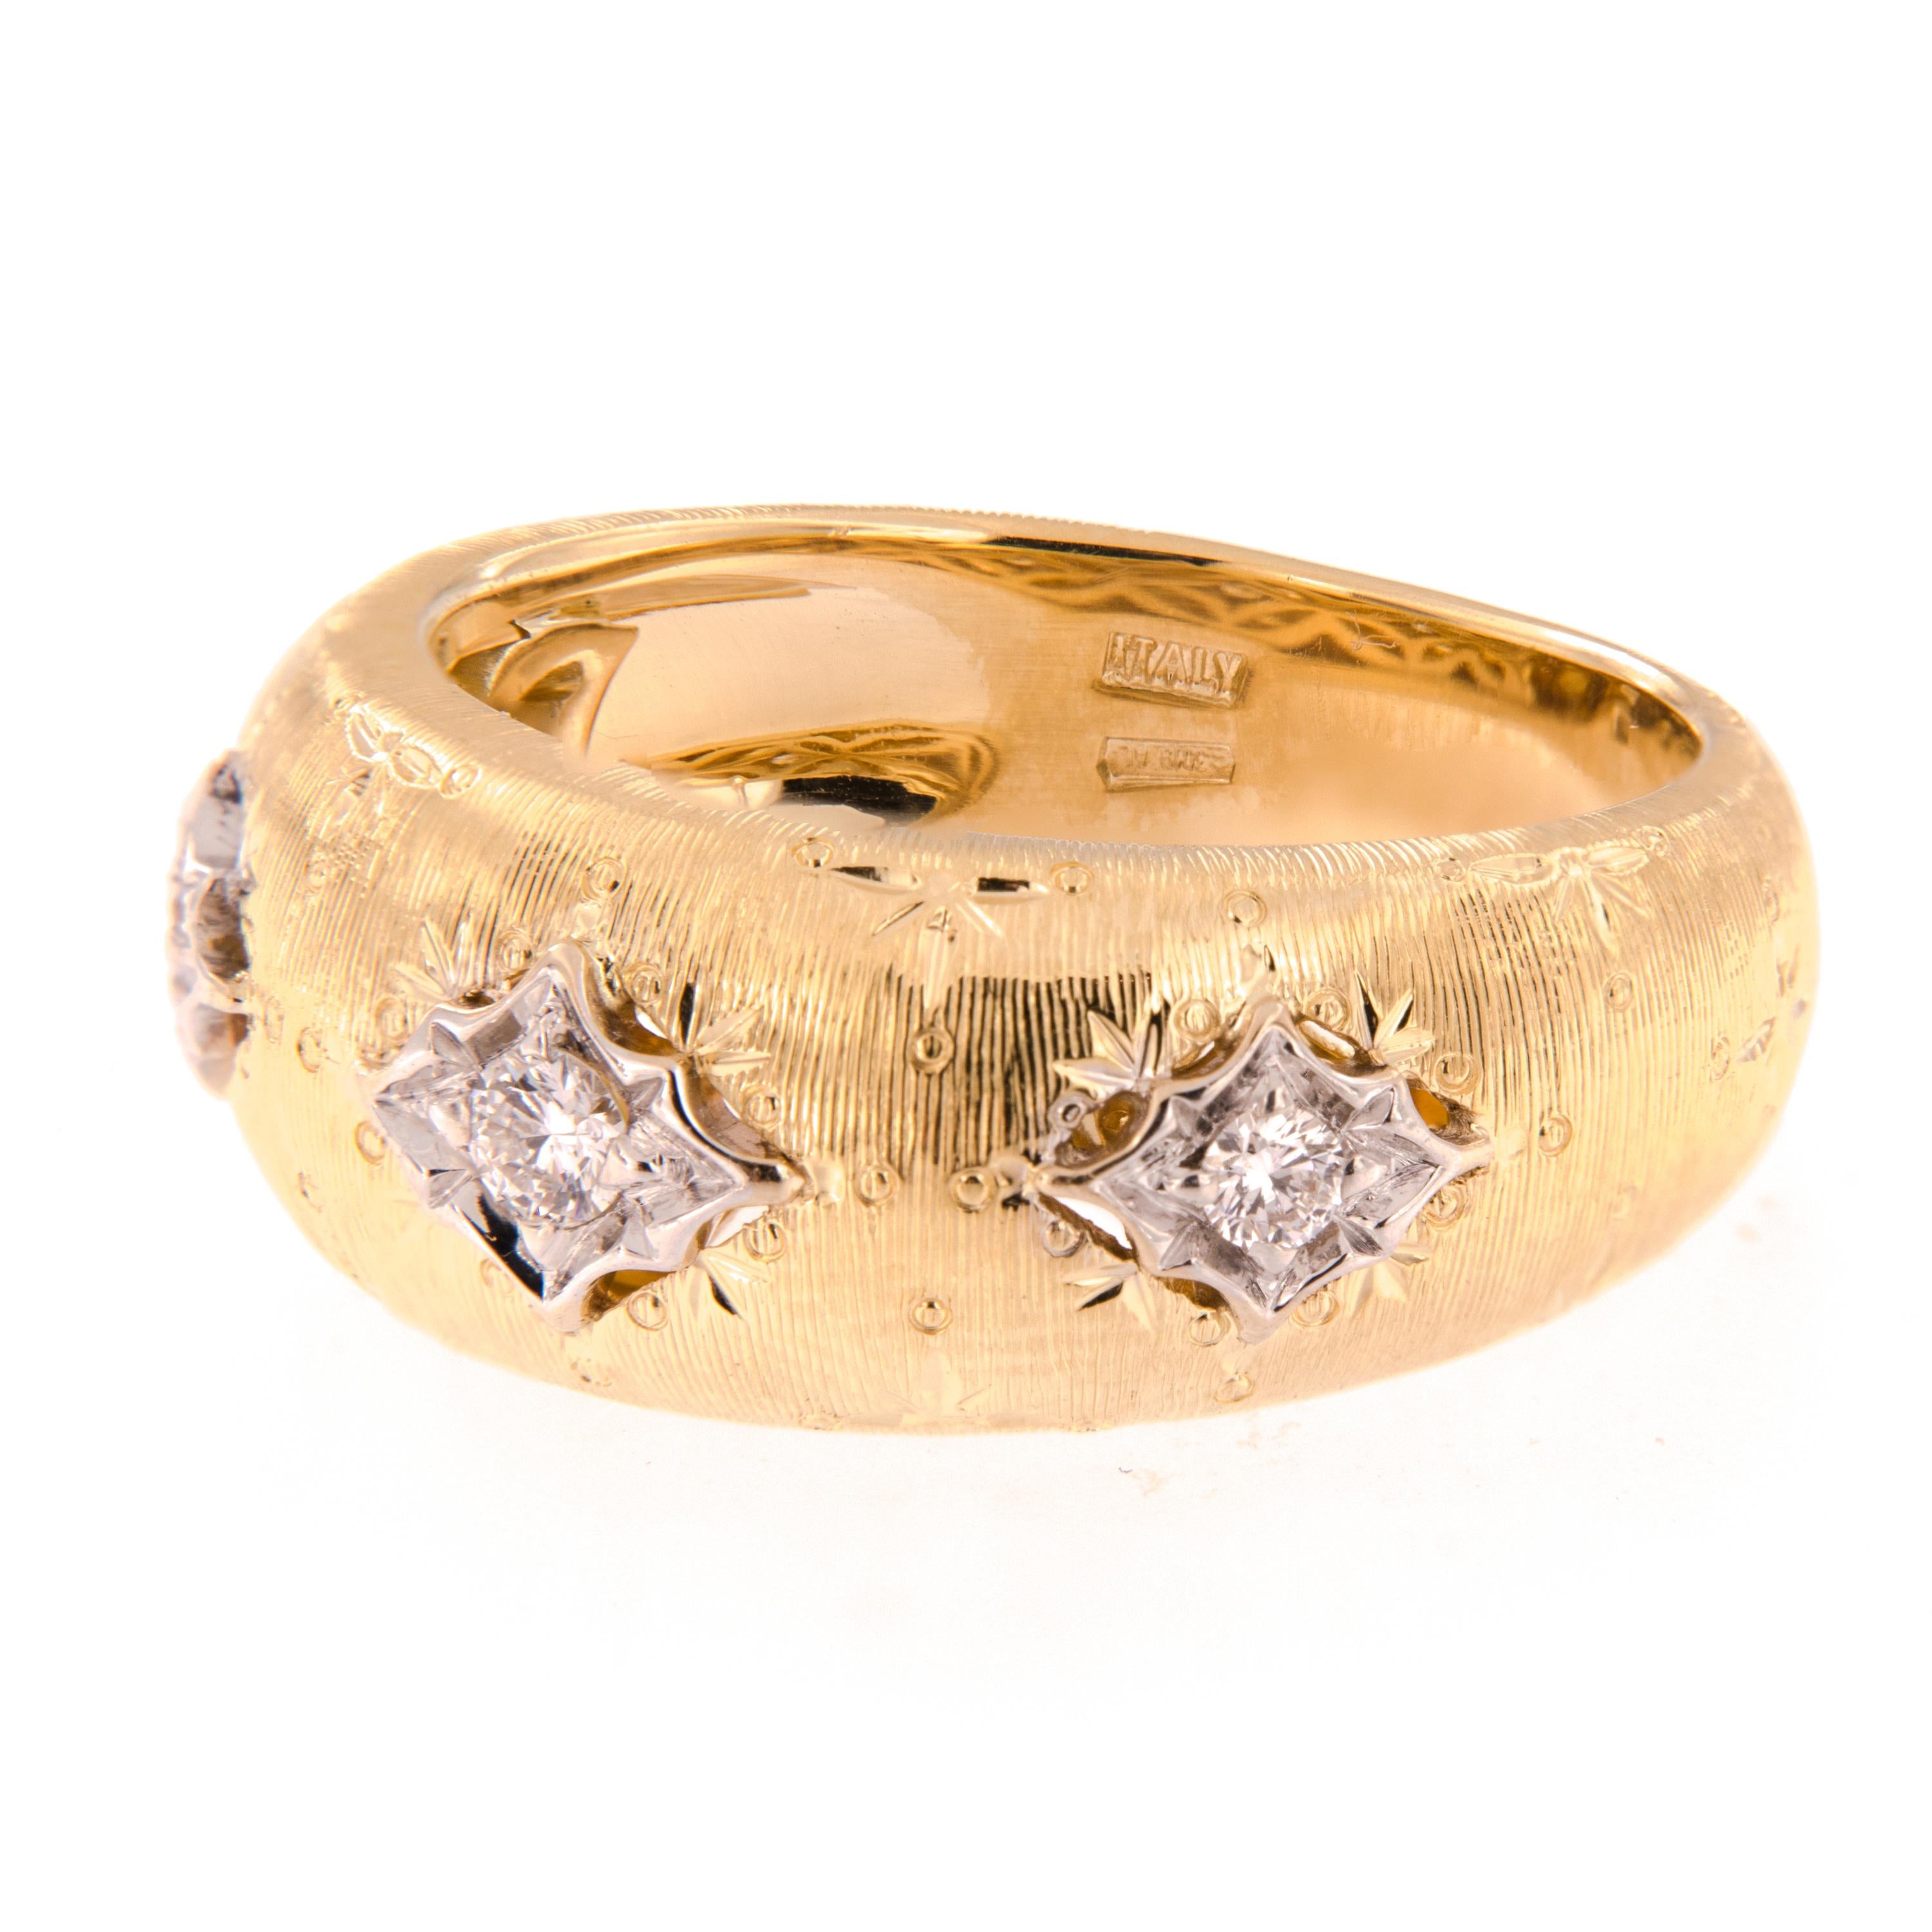 Expert Italian craftsmanship in 18k yellow and white gold band ring accented with diamonds. Ring is inspired by the classic design featuring textured gold made to look like fine fabric. Ring is a size 6 but can be modified. Complimentary signature